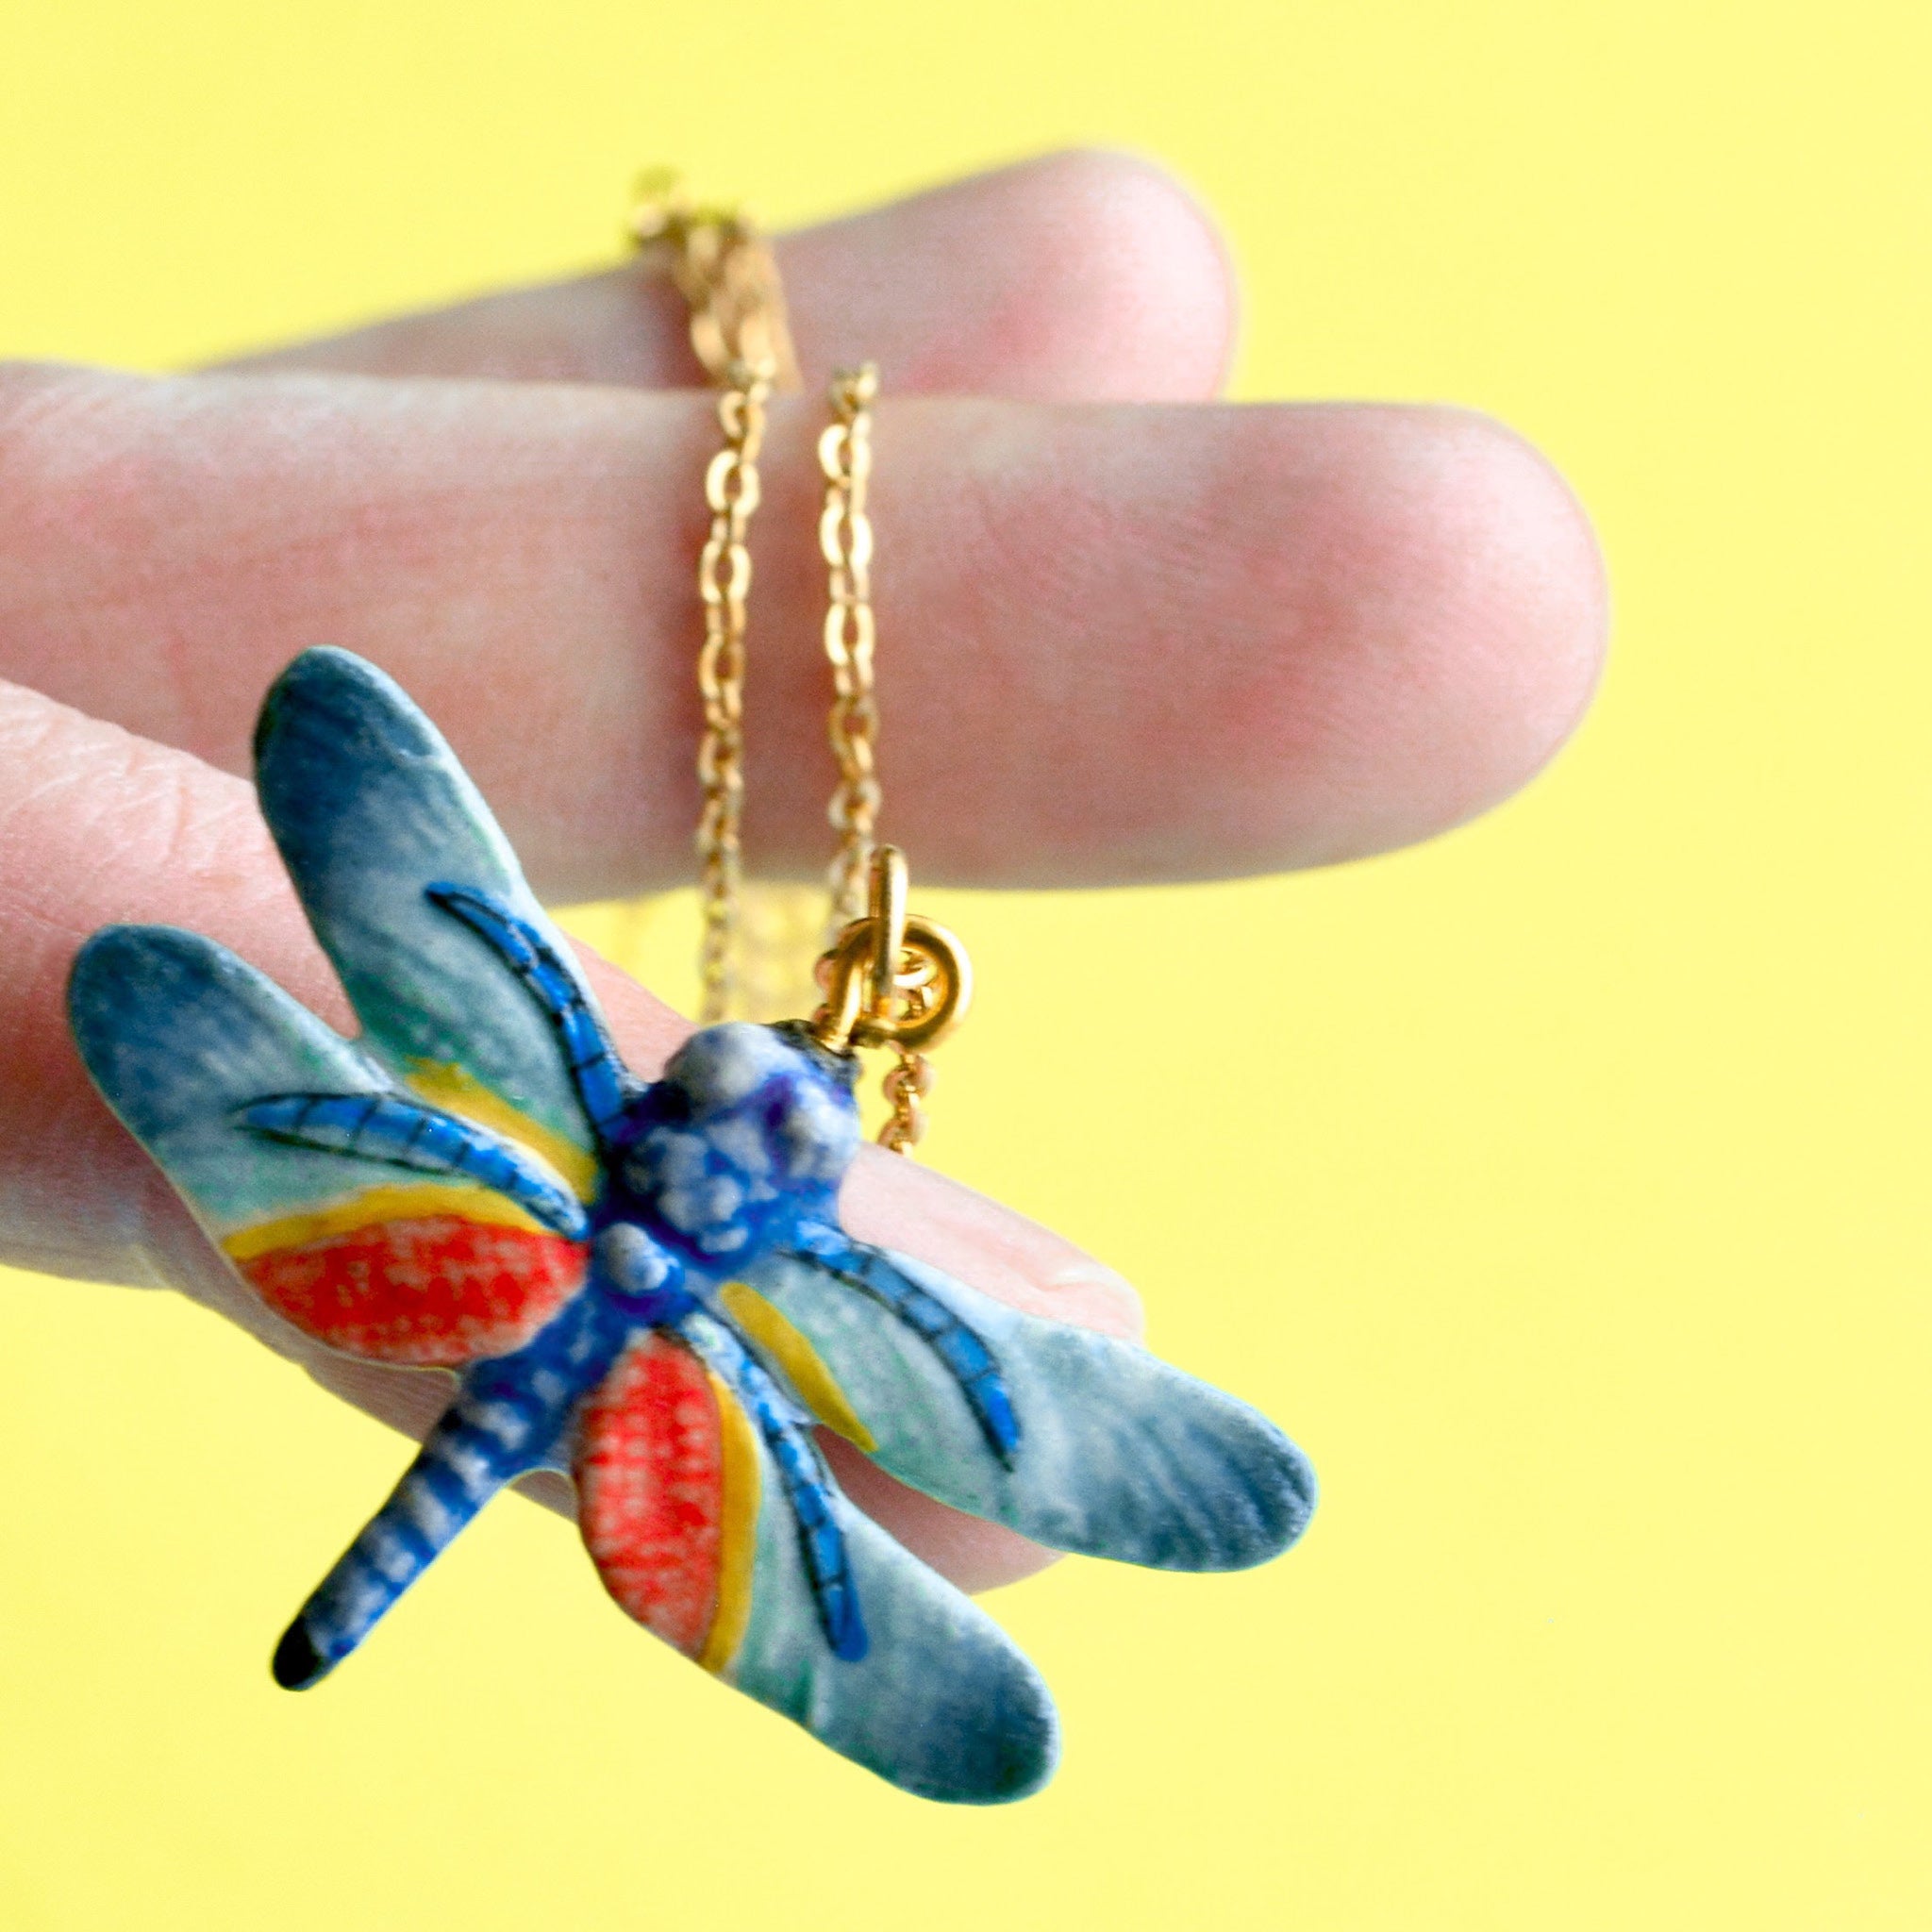 Dragonfly Necklace | Camp Hollow Ceramic Animal Jewelry